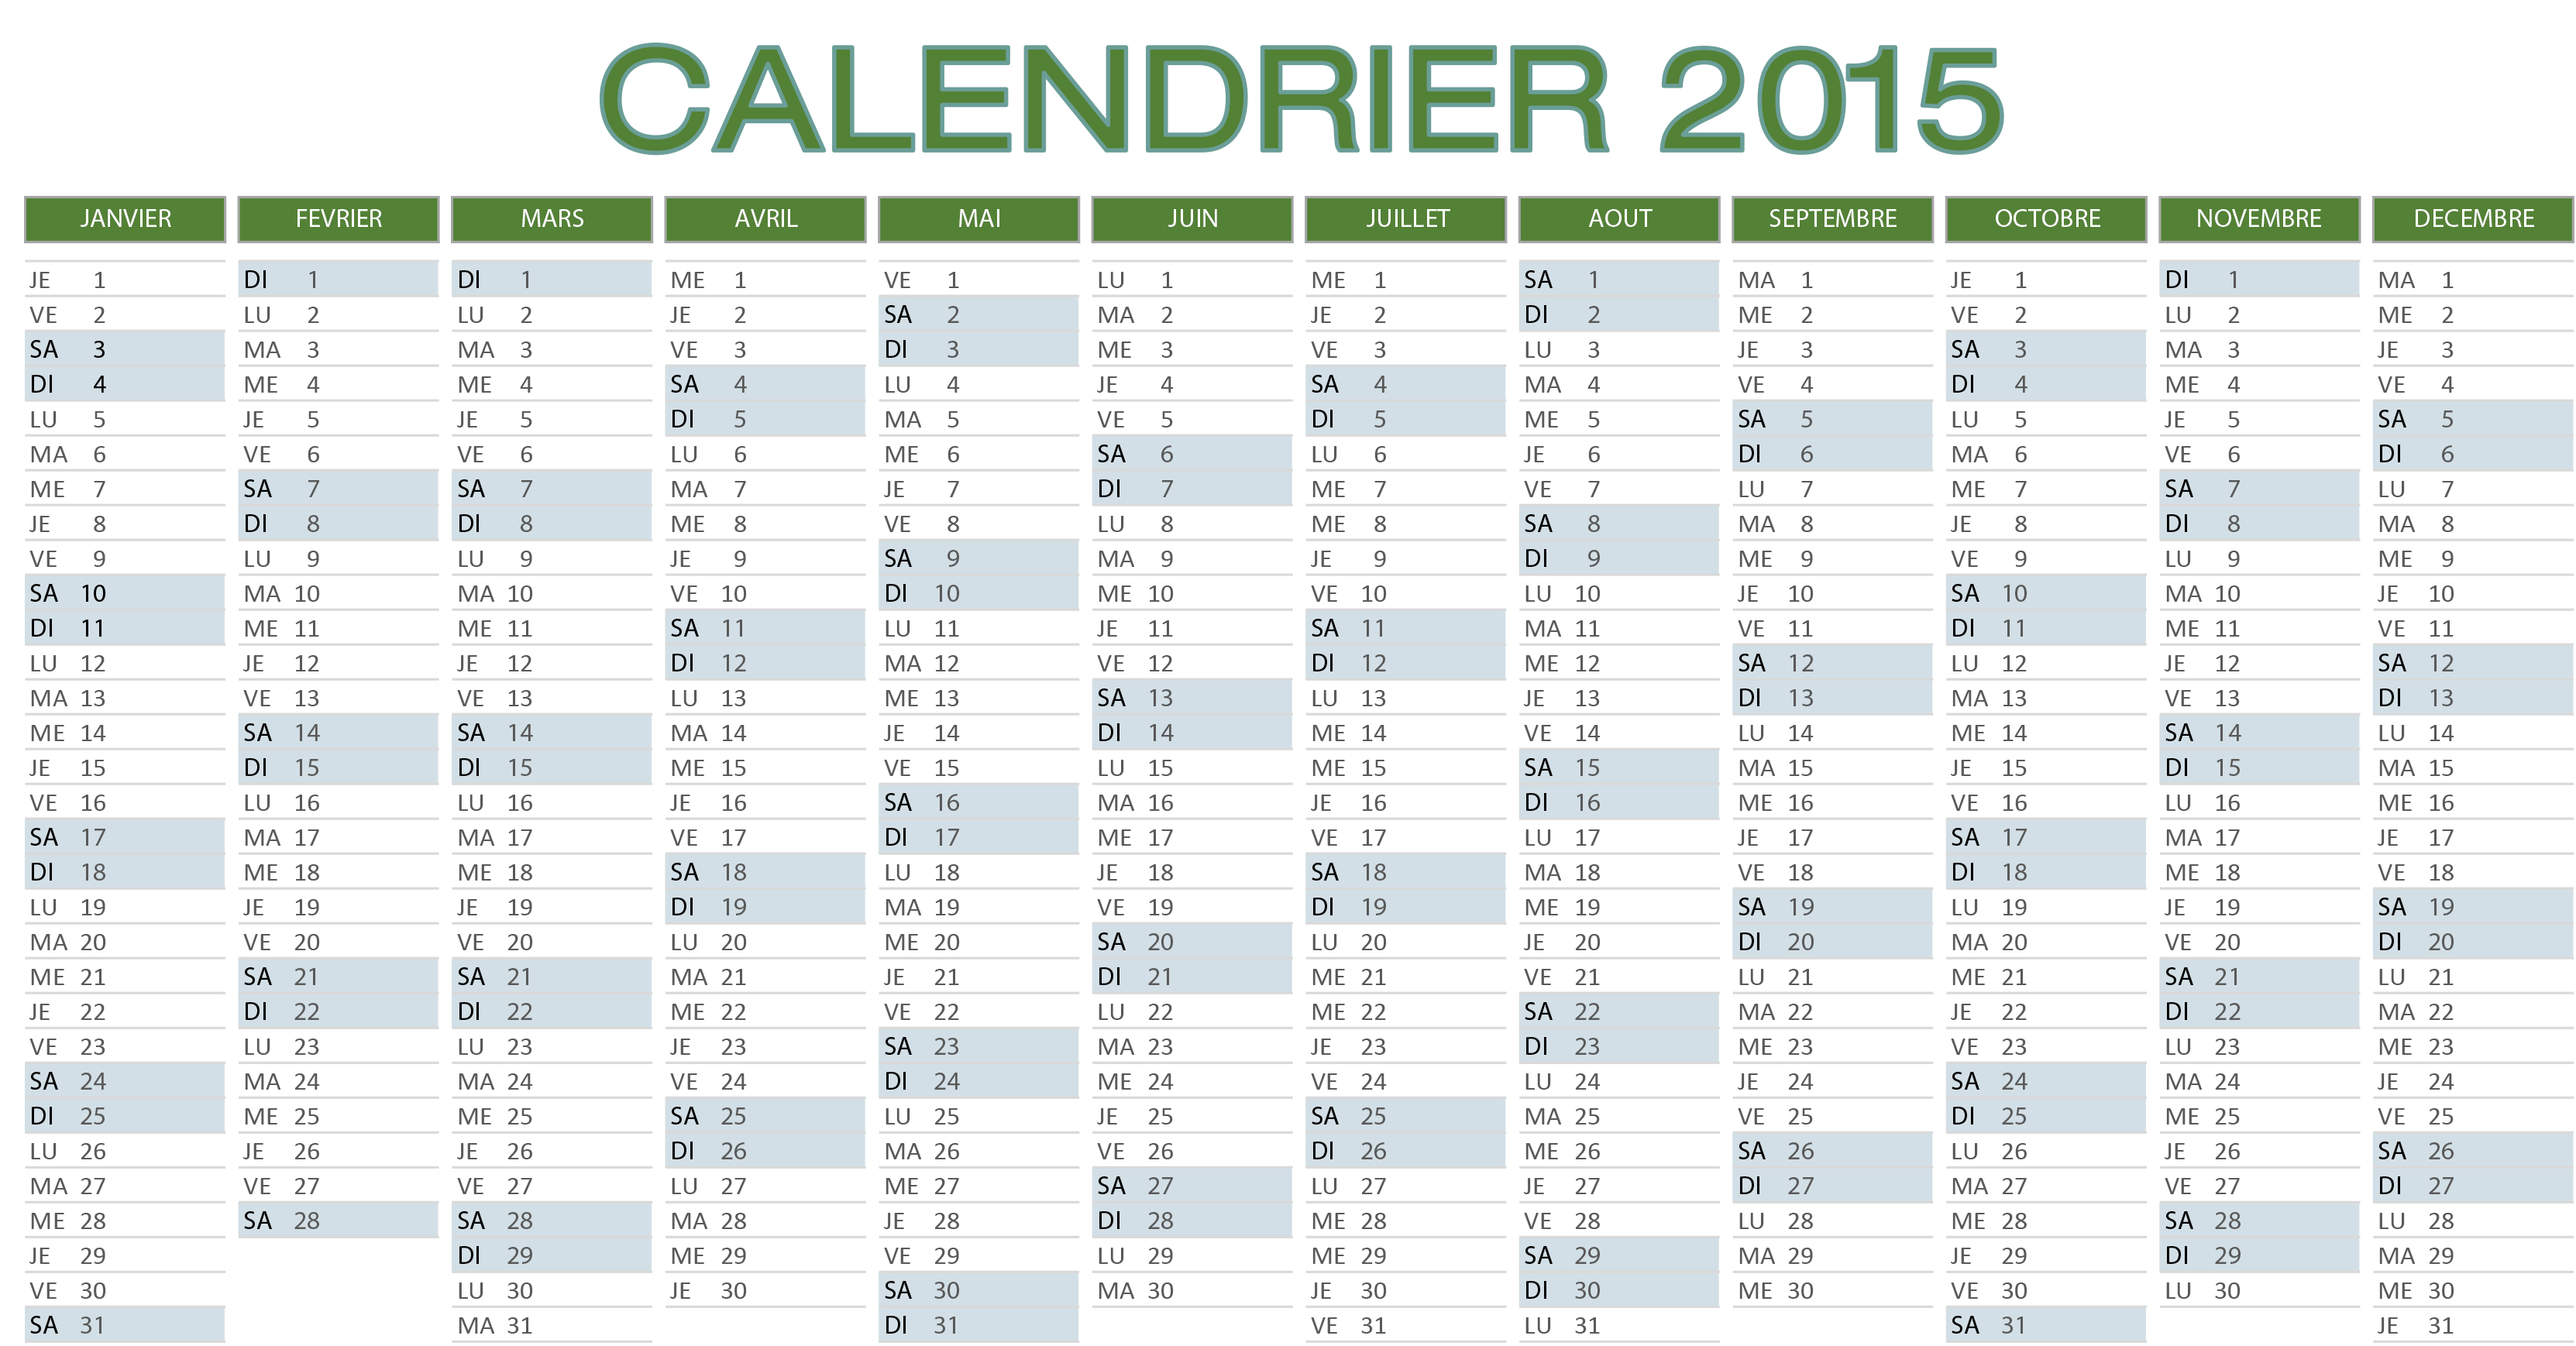 Telecharger calendrier 2016 excel